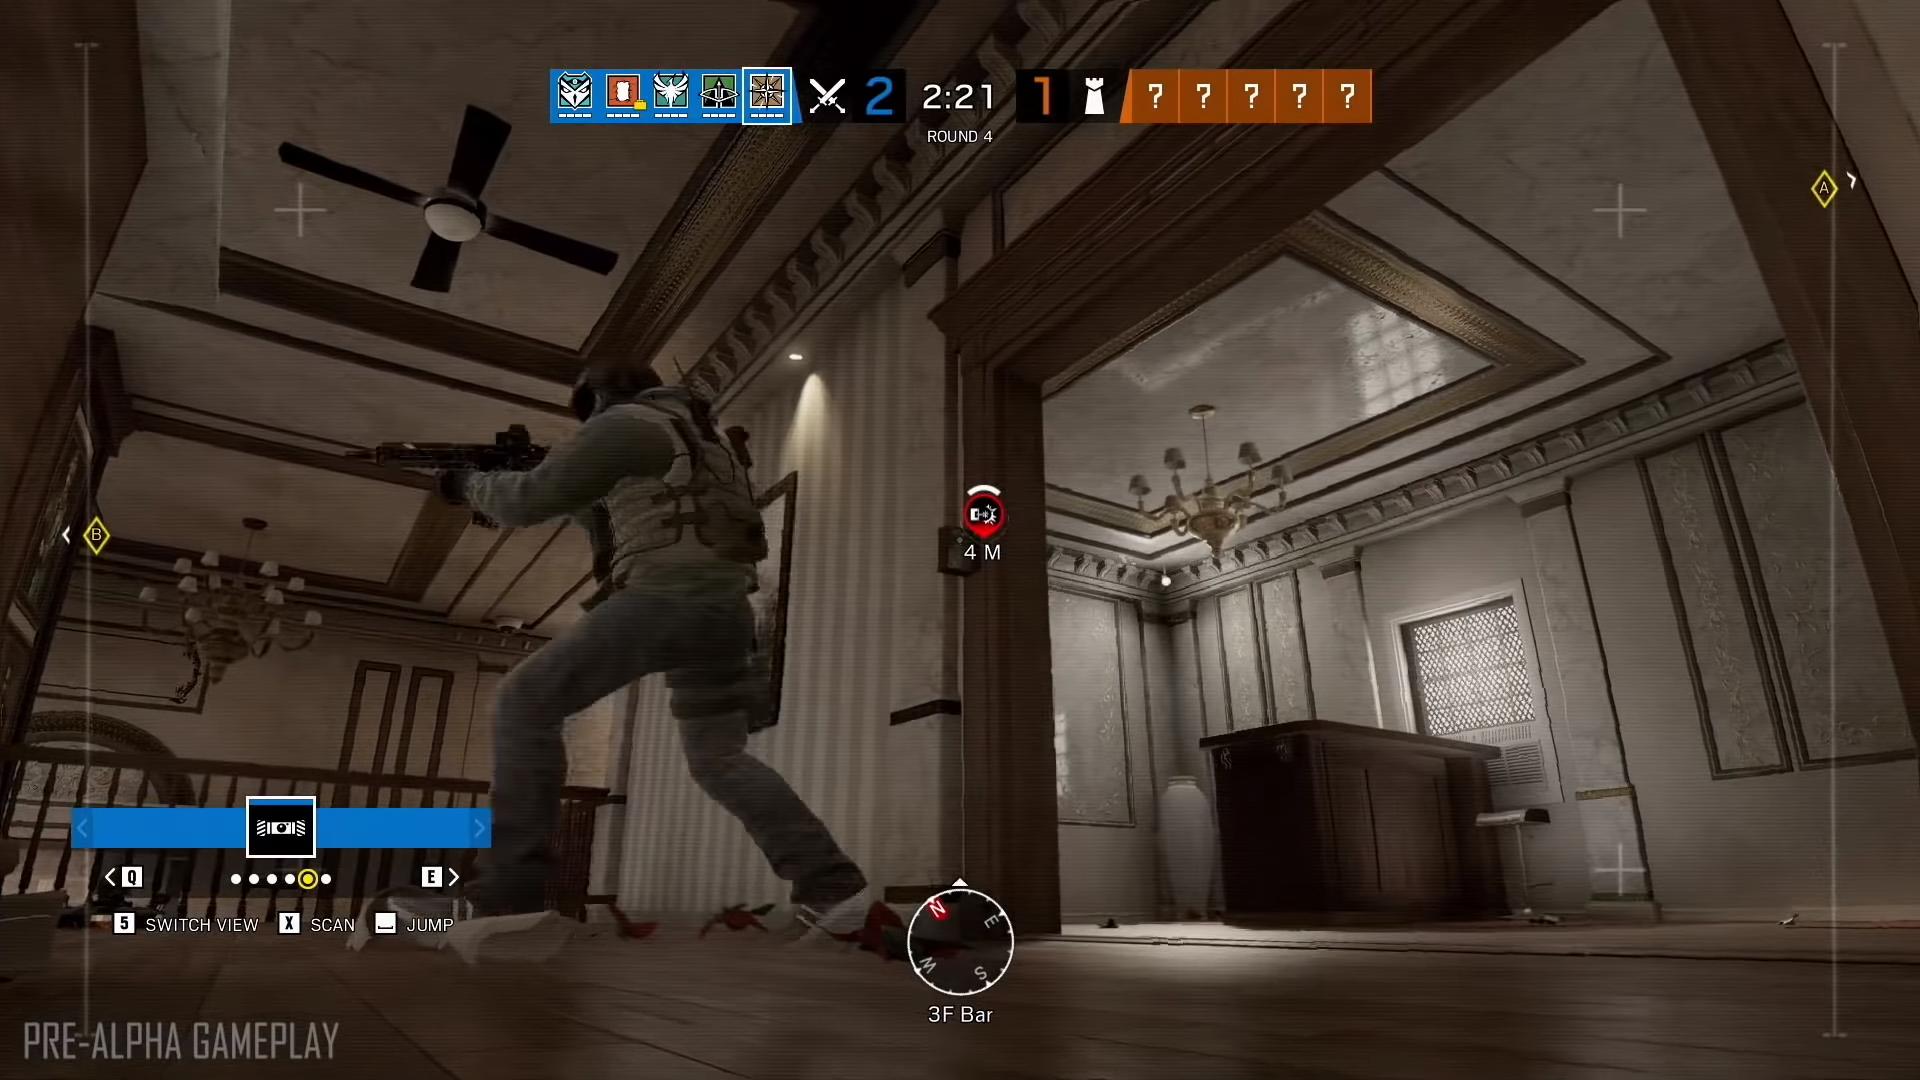 Ping 2.0 on drone in Siege